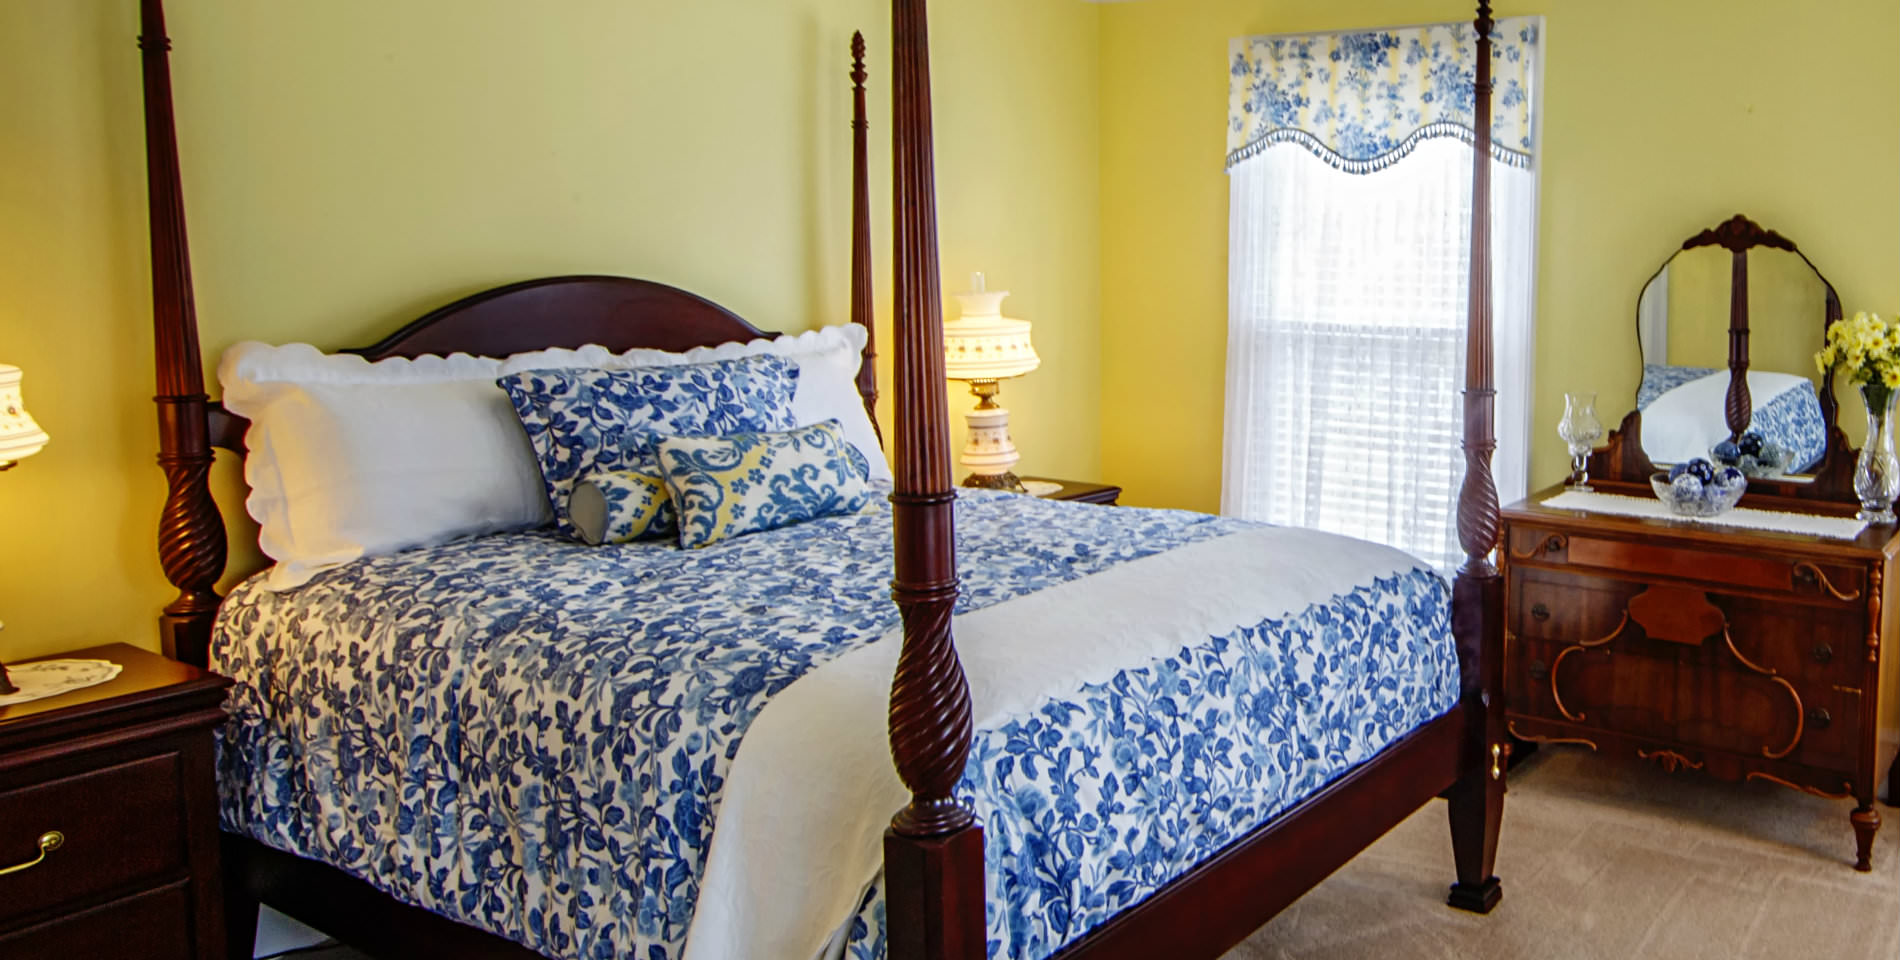 The Alyce Wilson room with a four post wooden bedframe, blue and white bedding and yellow walls. 